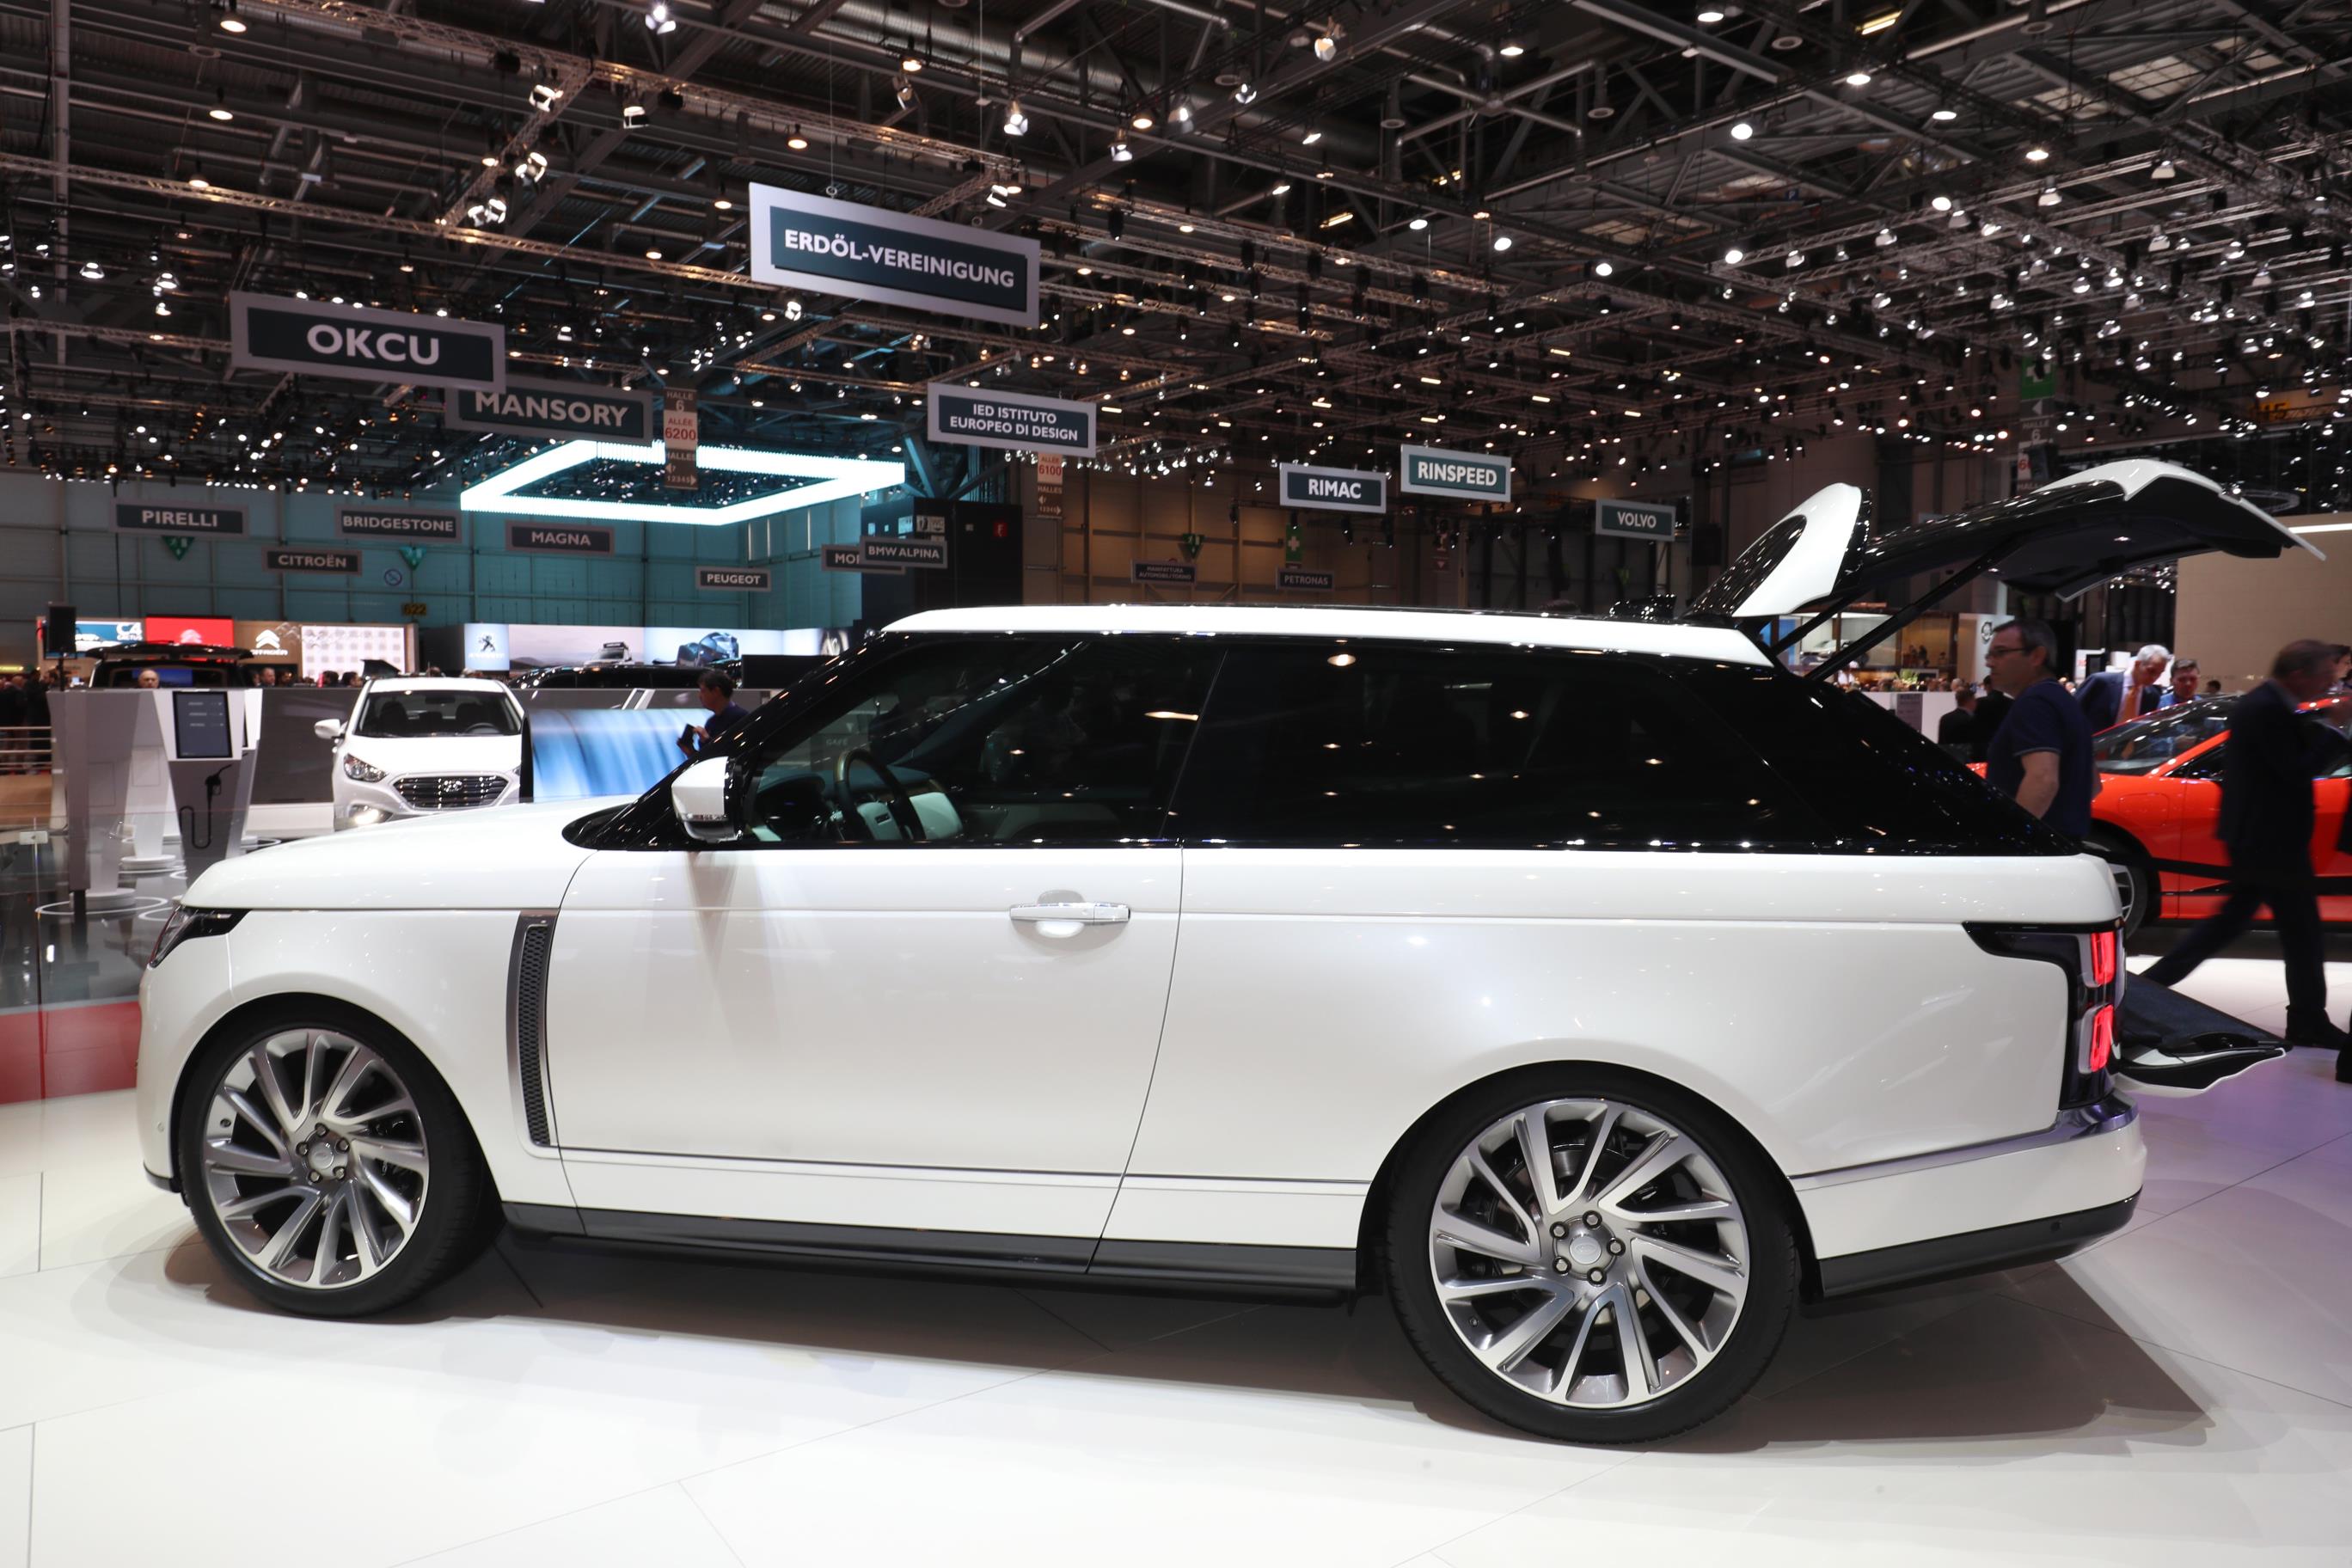 White Range Rover SV coupe at a motor show seen side on